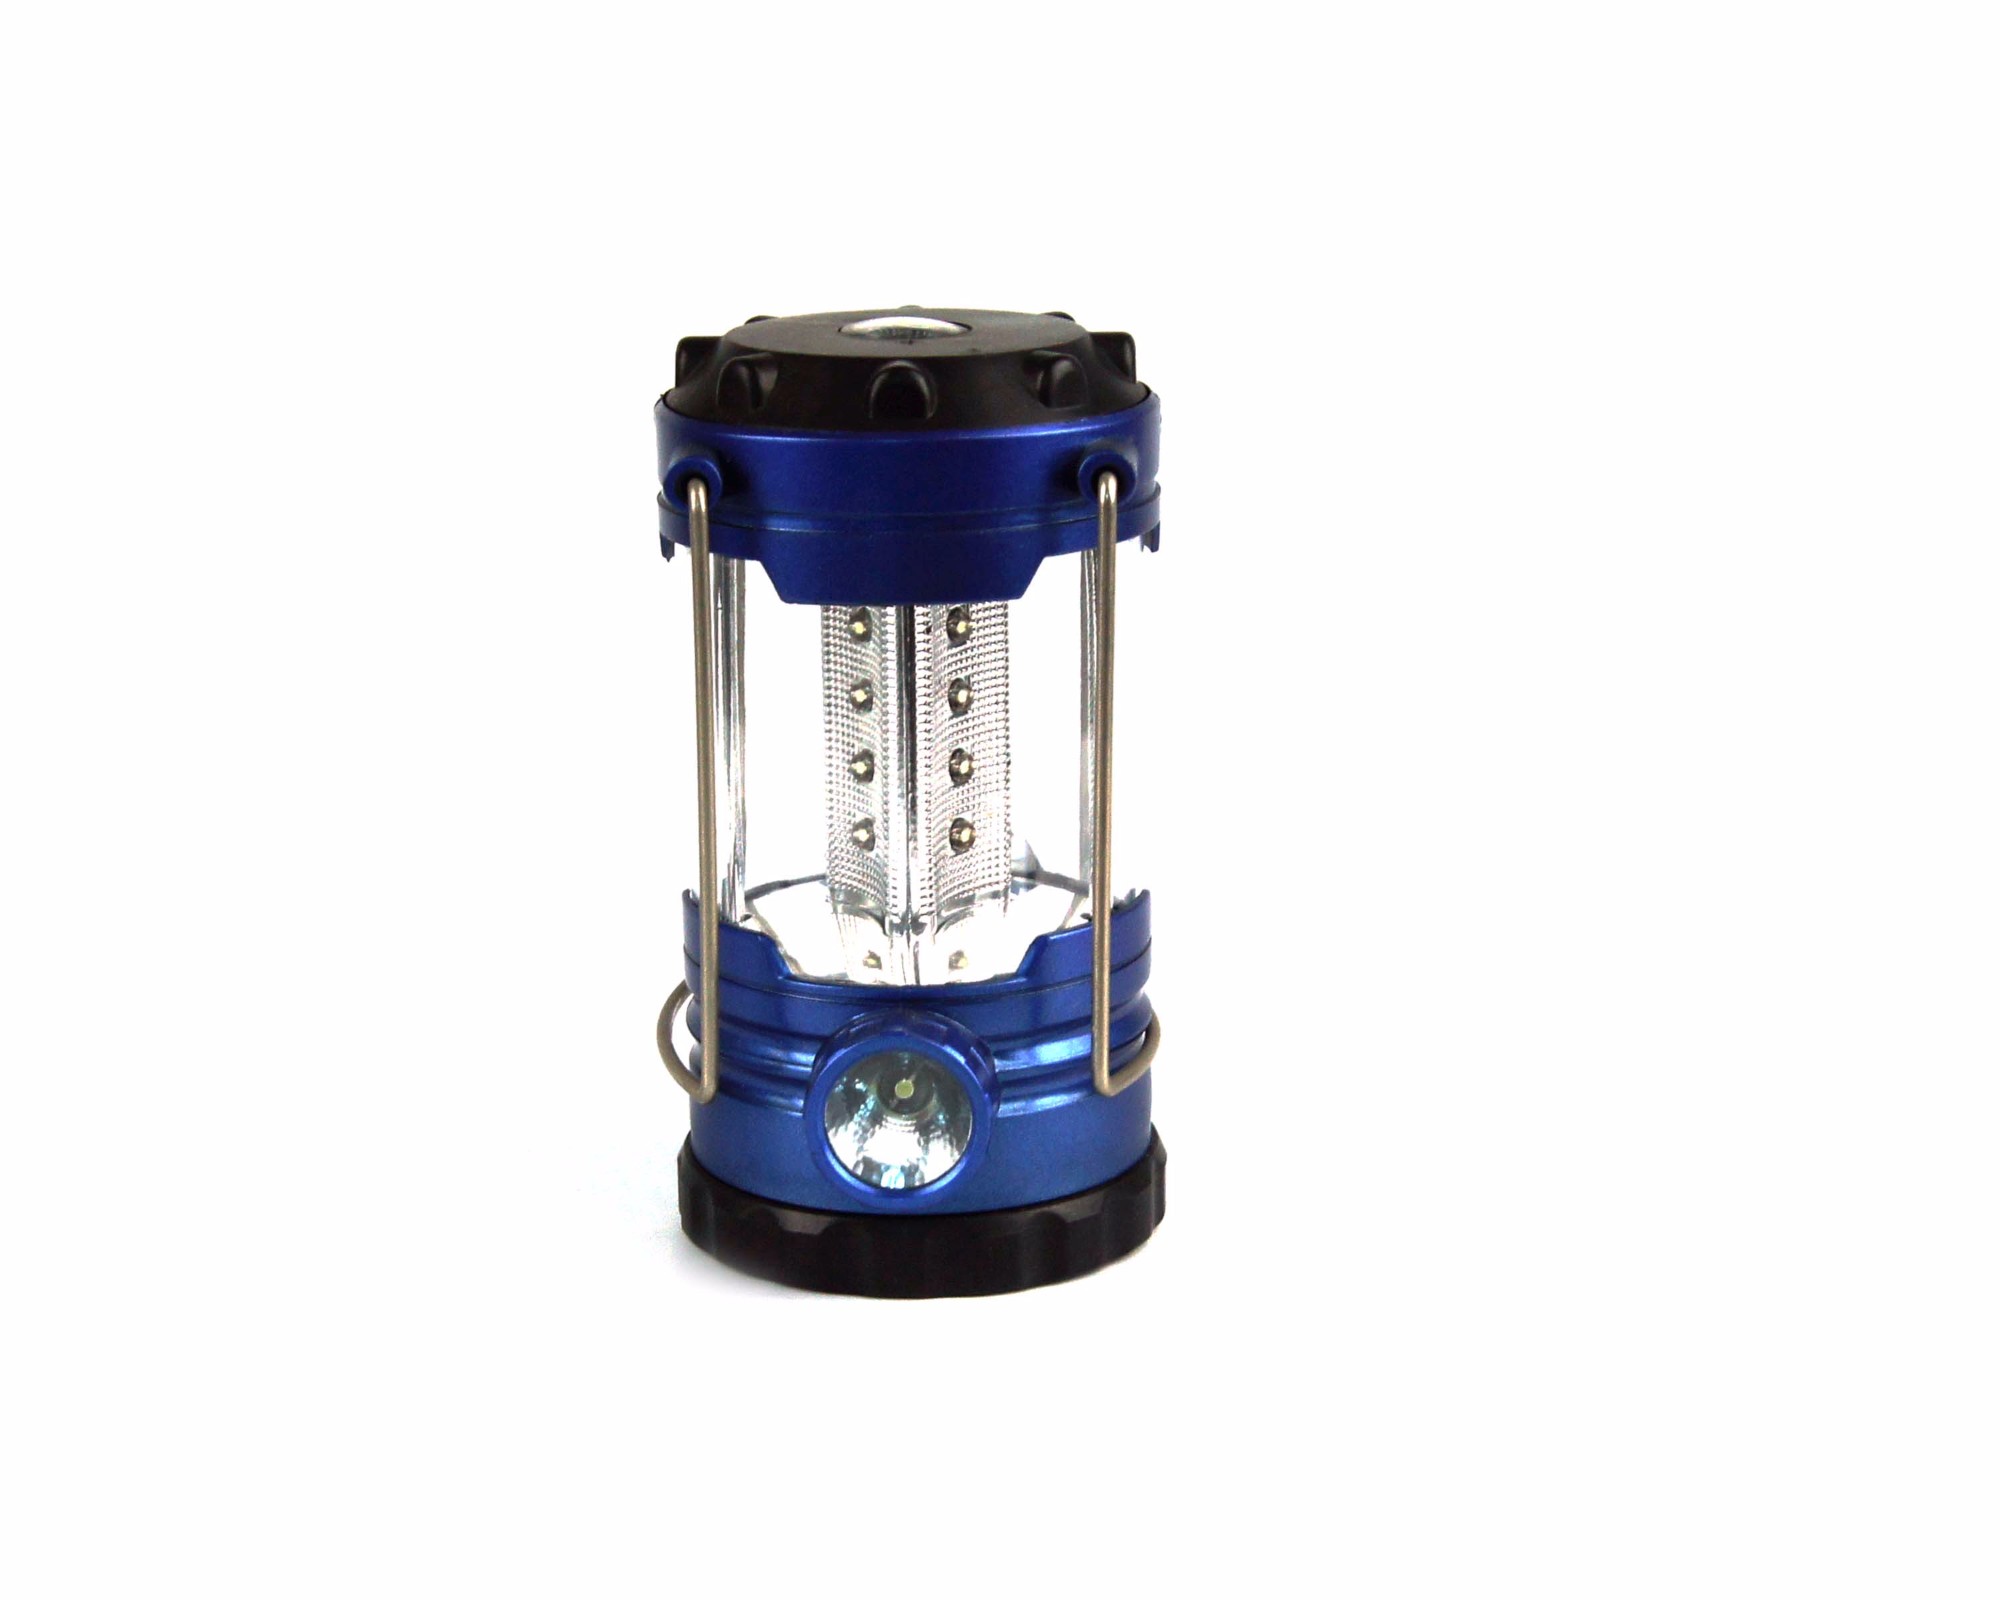 Hot Sale Cheap Price Plastic Material Outdoor Hand Multi-functional Bright 12 led Camping Lantern Light